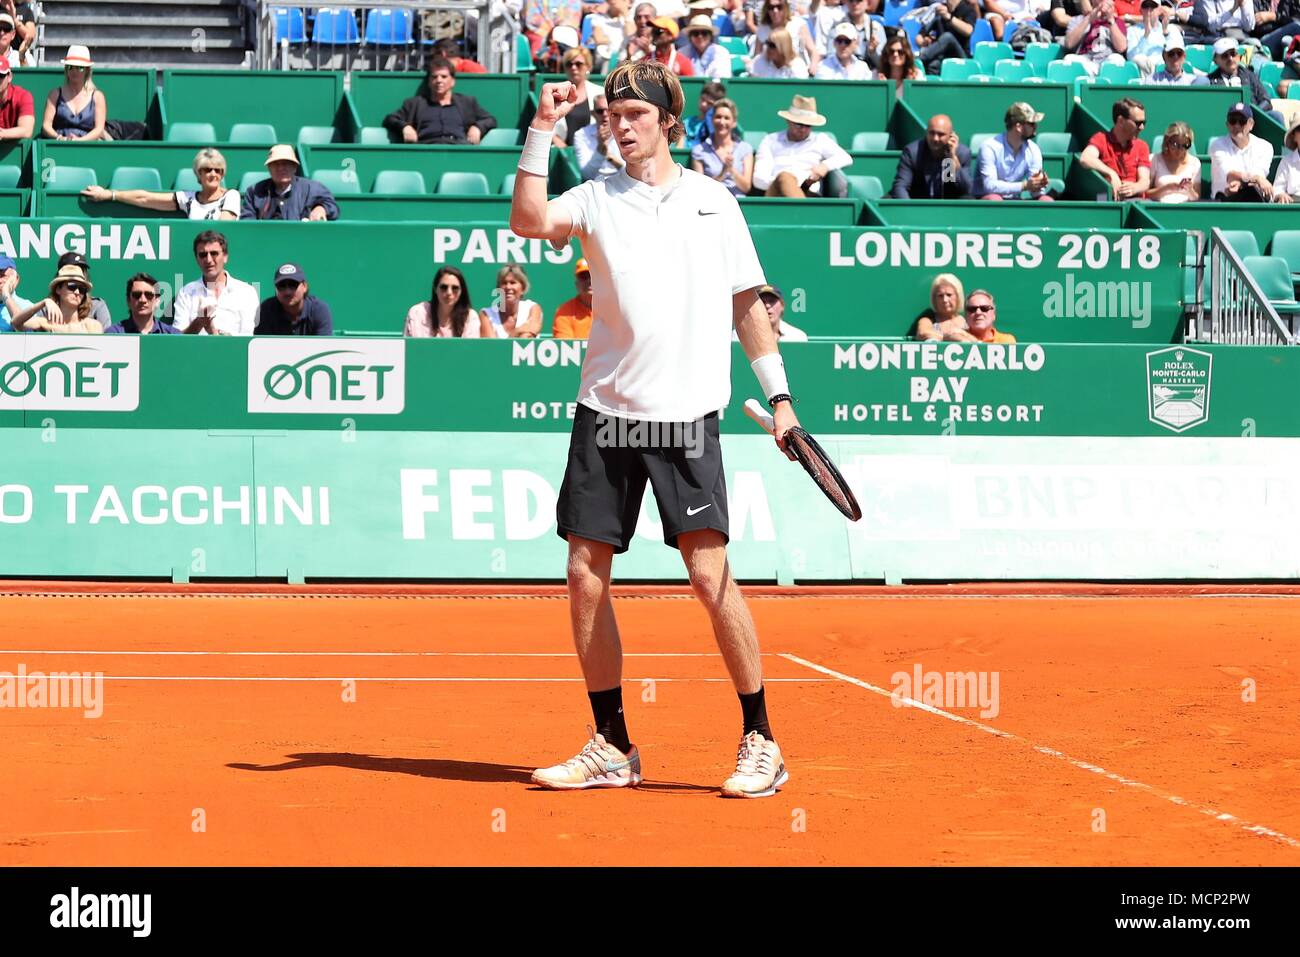 Players Box Tickets To The ATP Monte-Carlo Rolex Masters